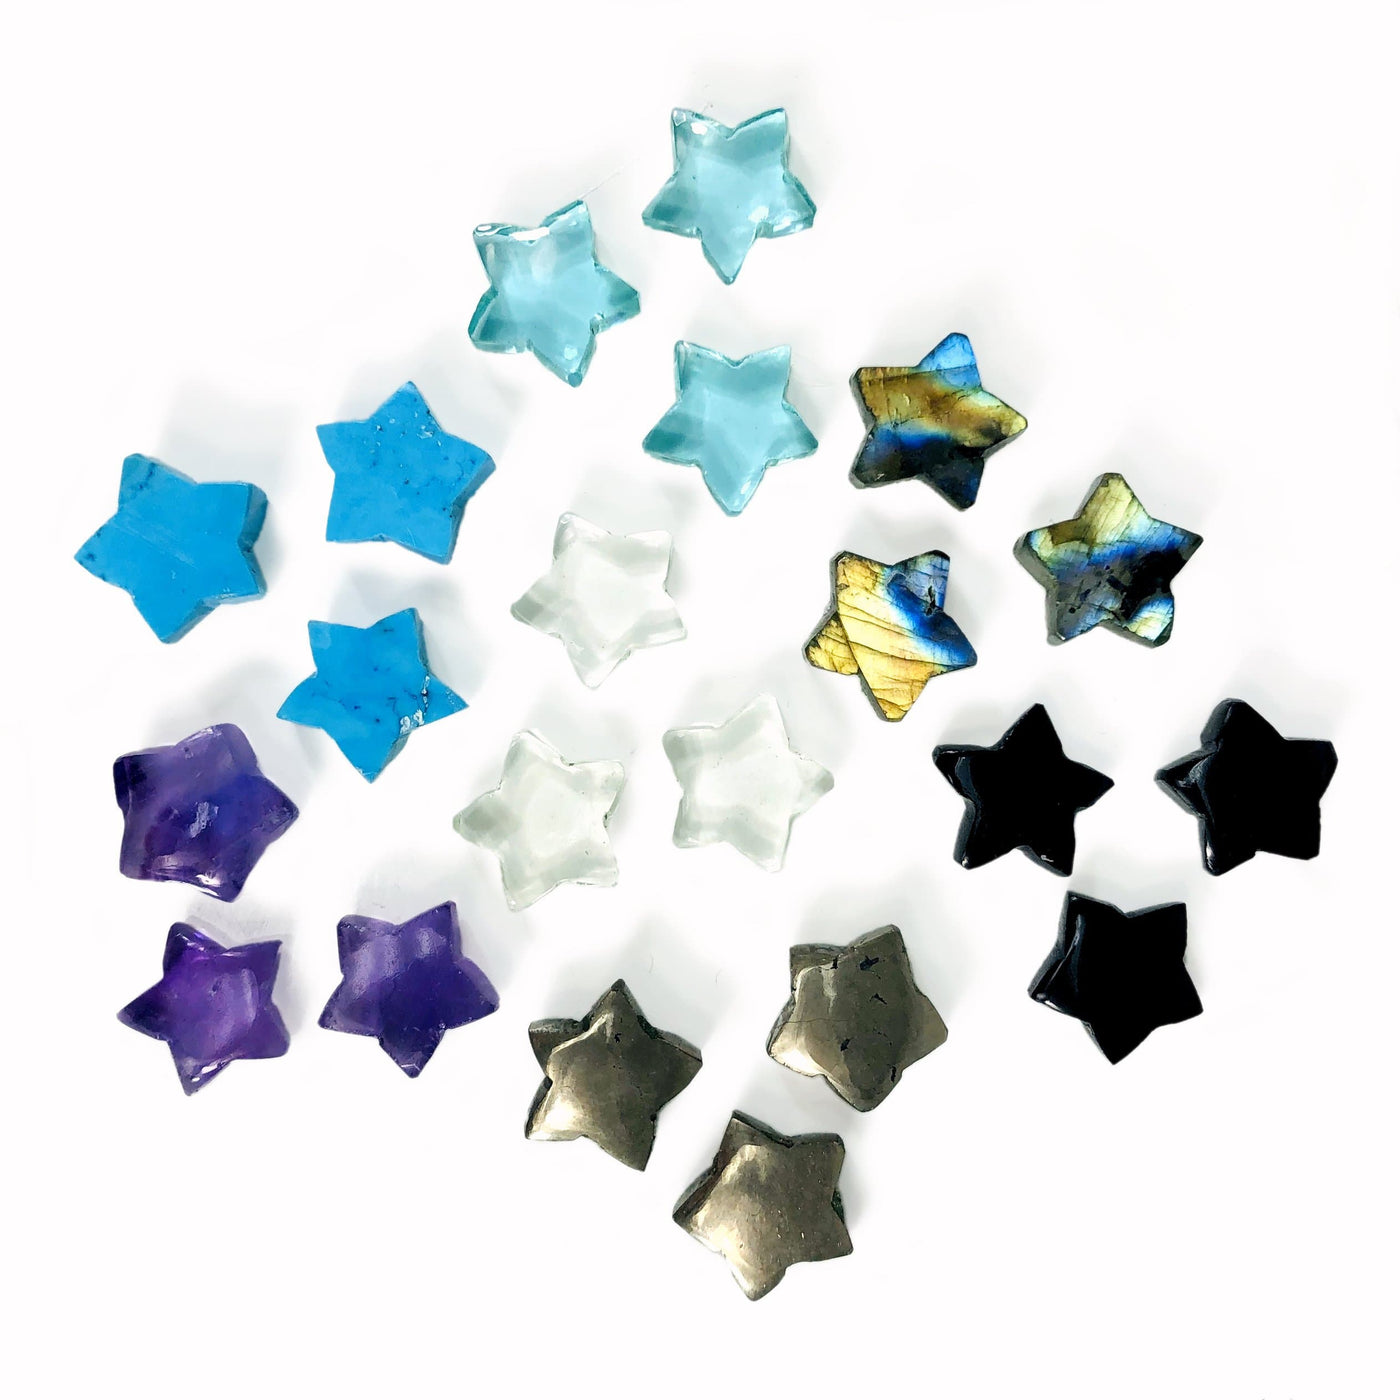 Gemstone Star Cabochons in different stones on a white background